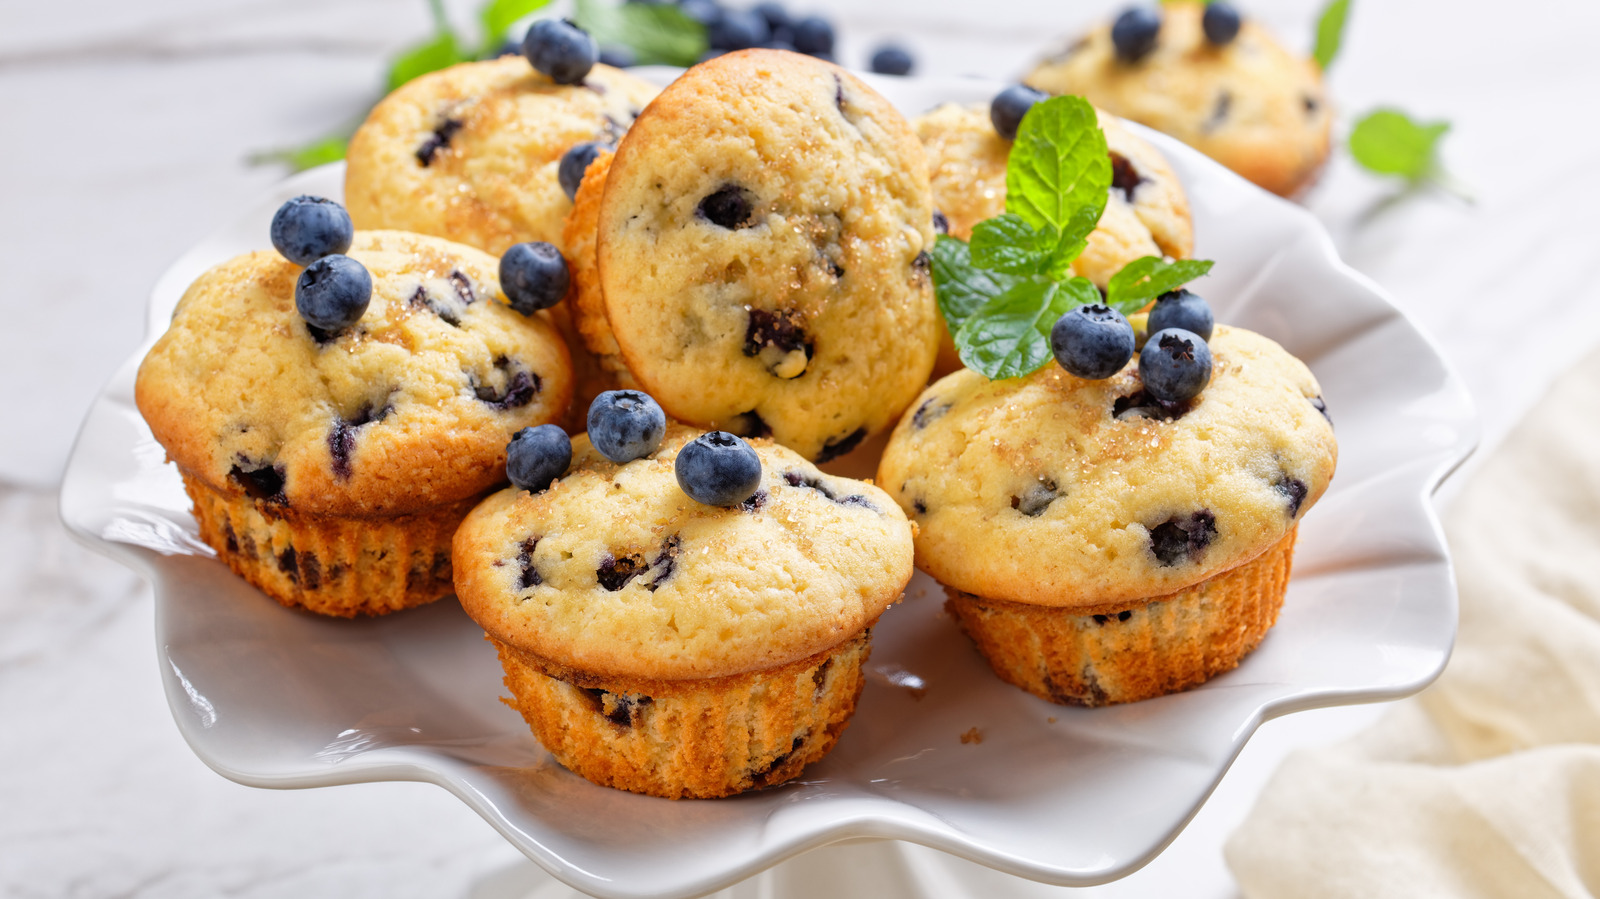 Why You Should Be Careful When Filling Muffin Cups